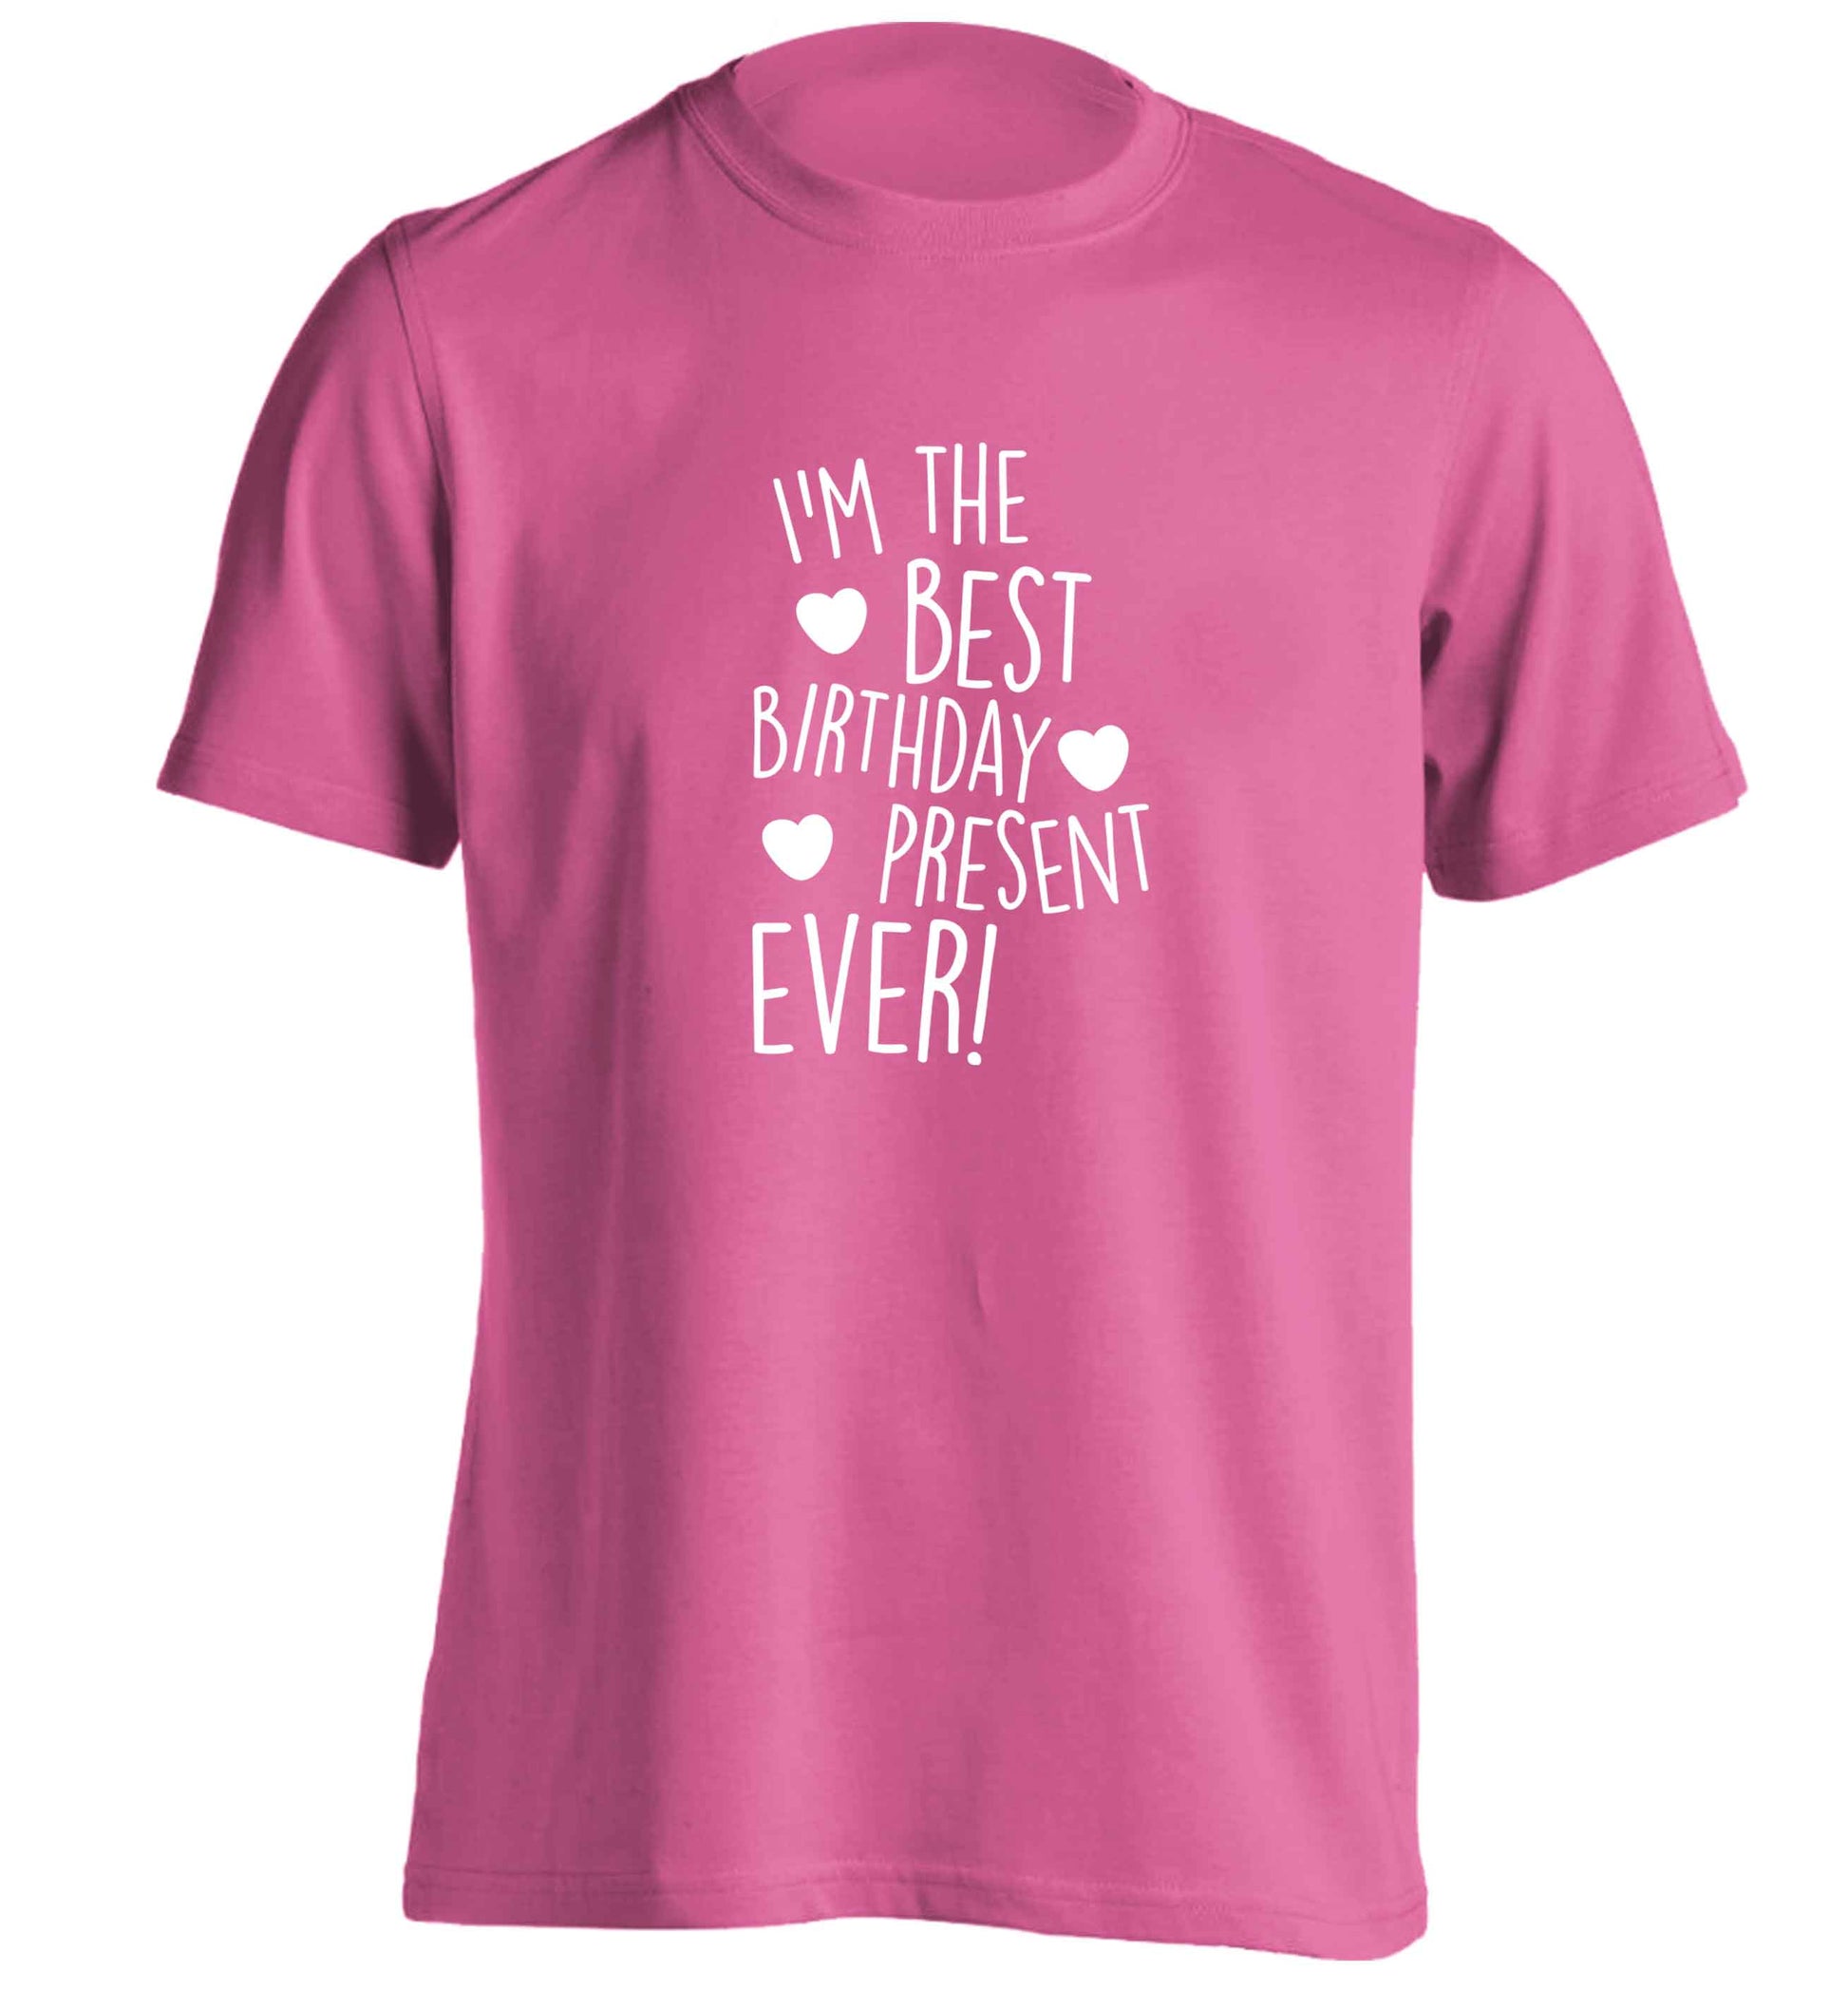 I'm the best birthday present ever adults unisex pink Tshirt 2XL